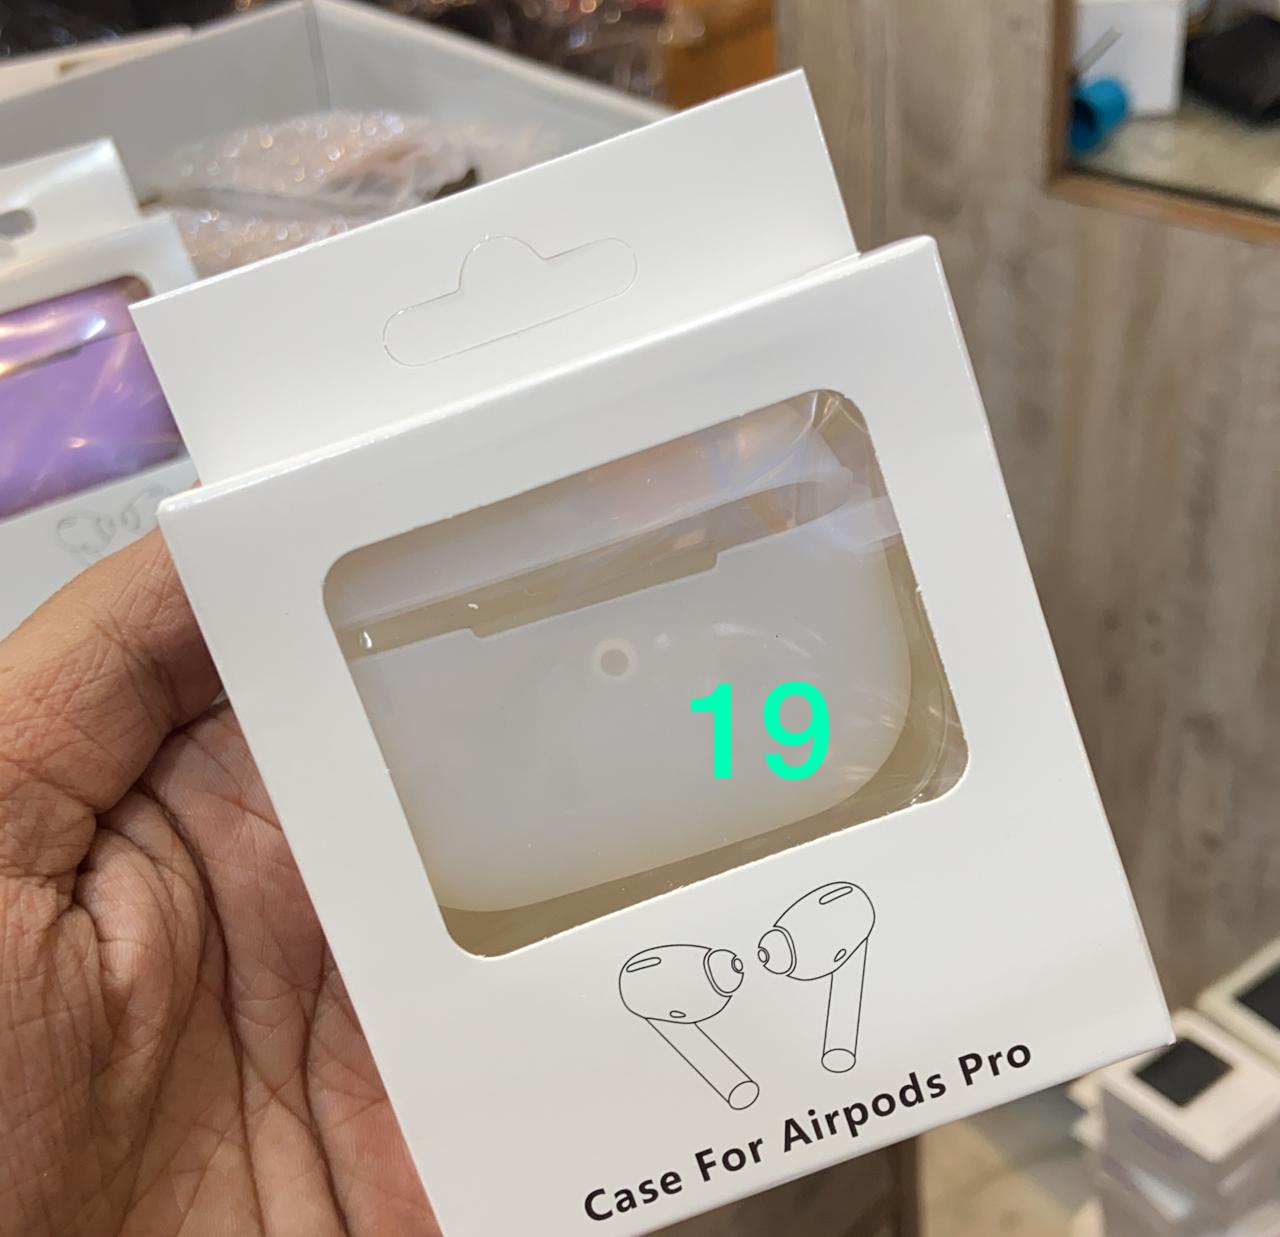 Airpods Case for Airpods 2